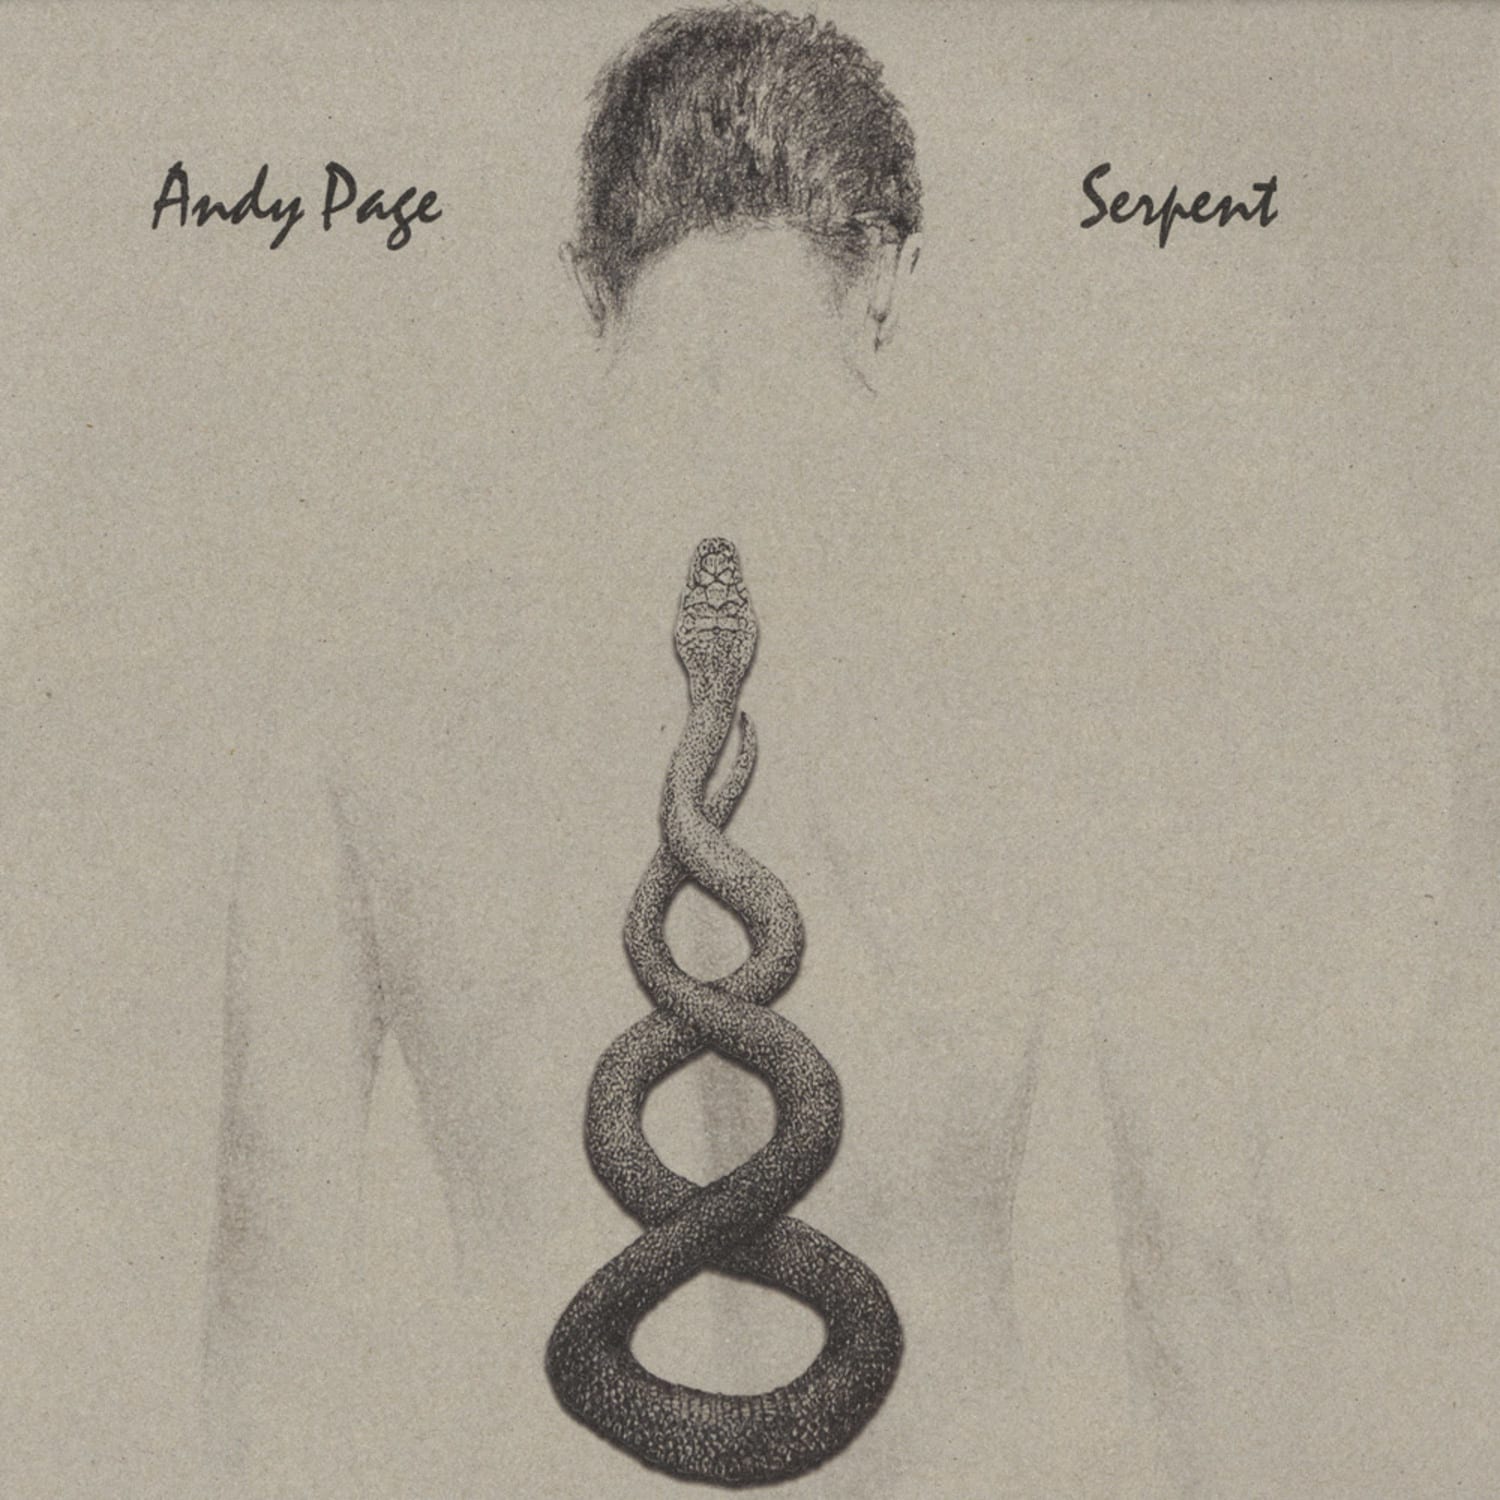 Andy Page - SERPENT